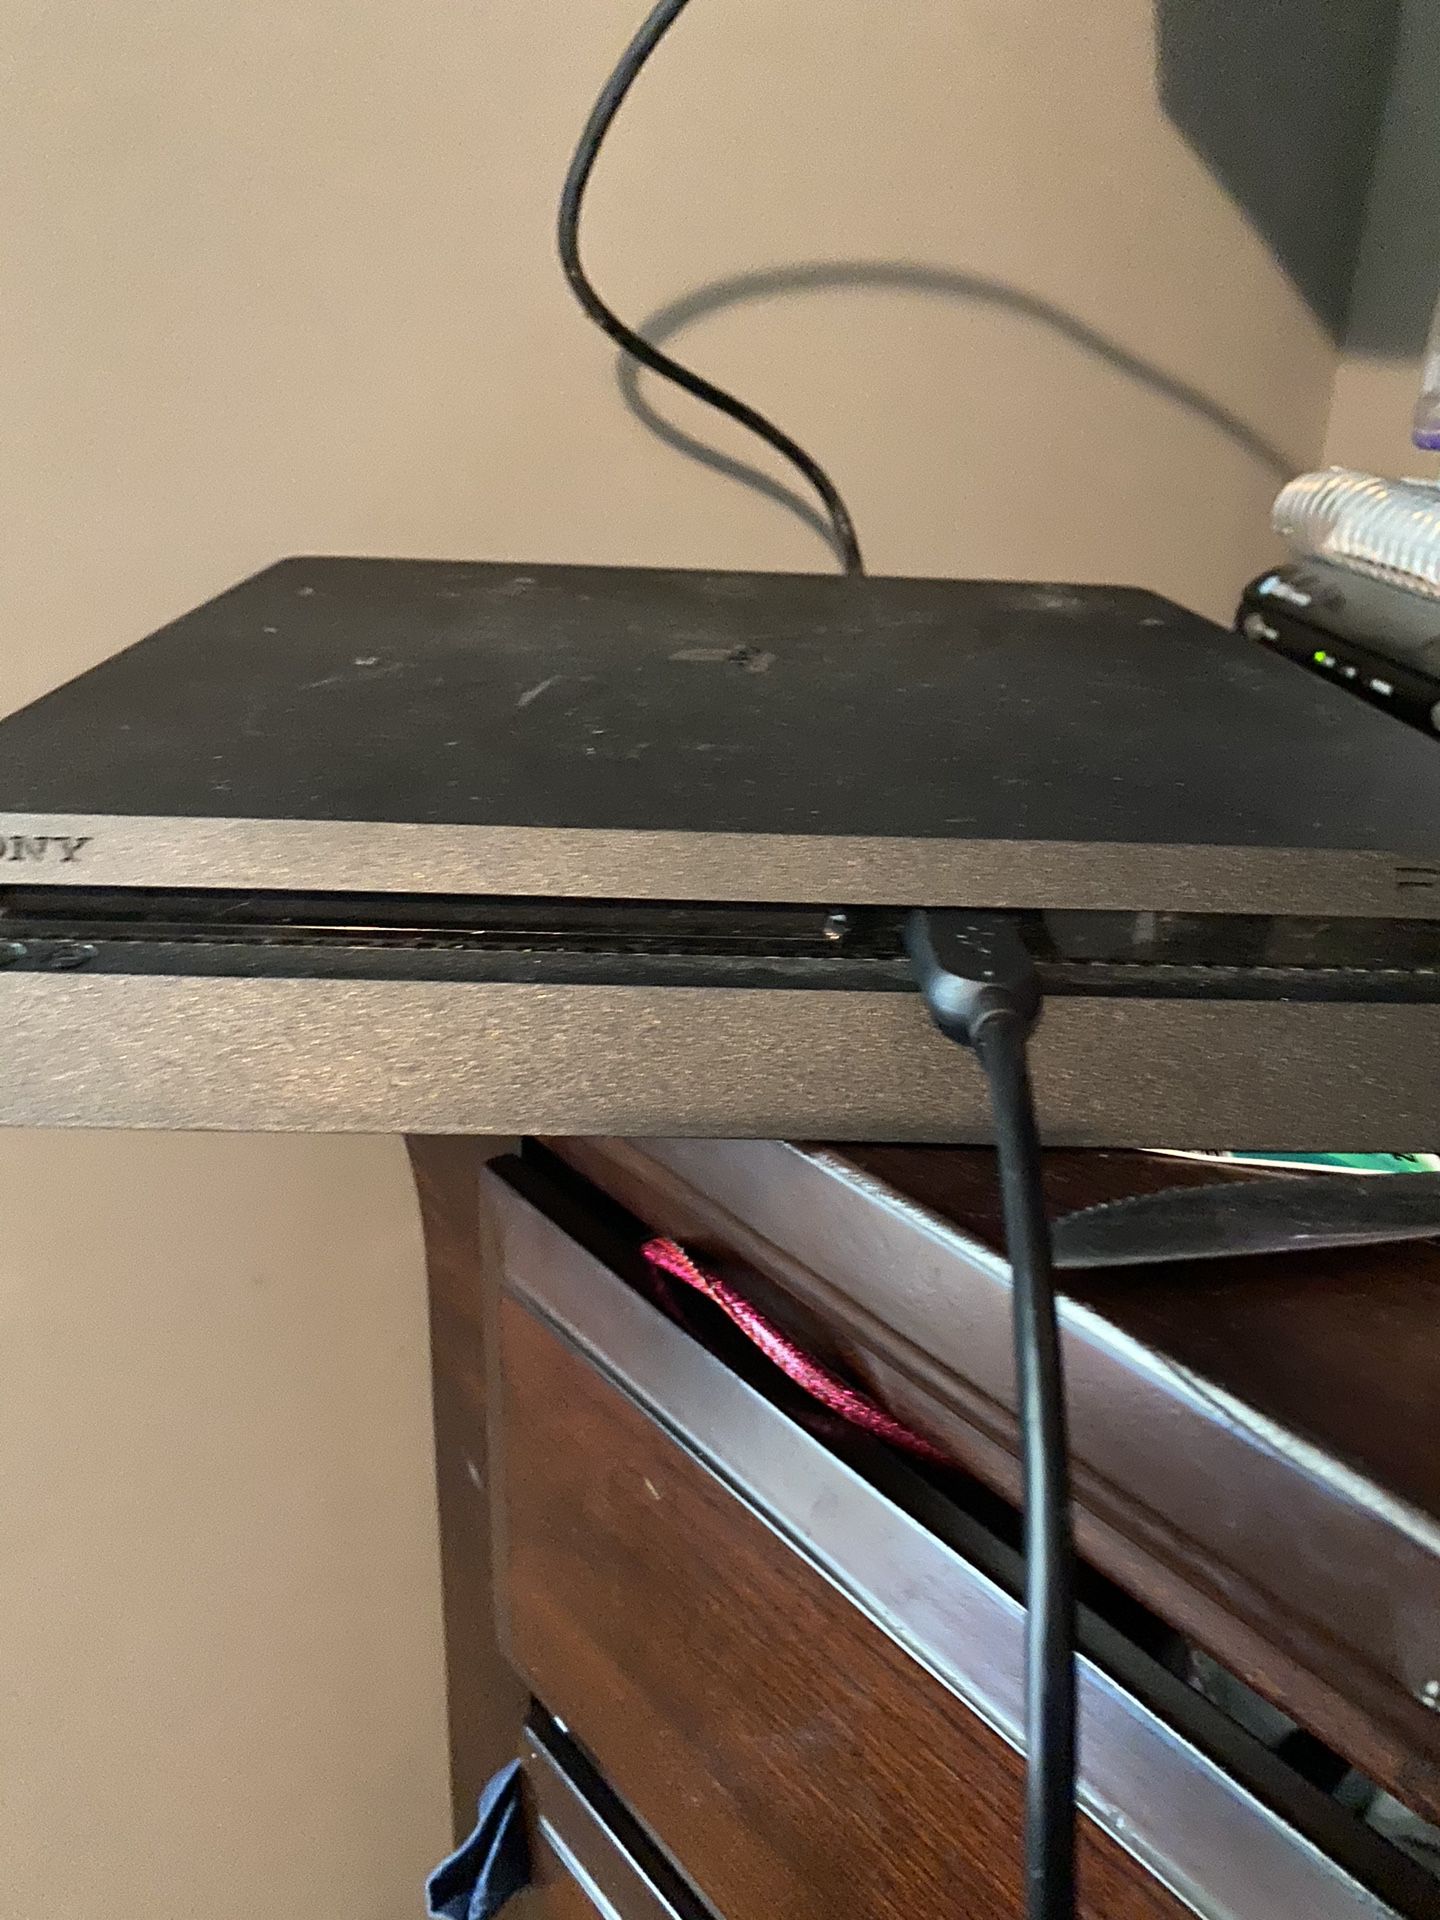 PS4 For Sale Used But Slightly New